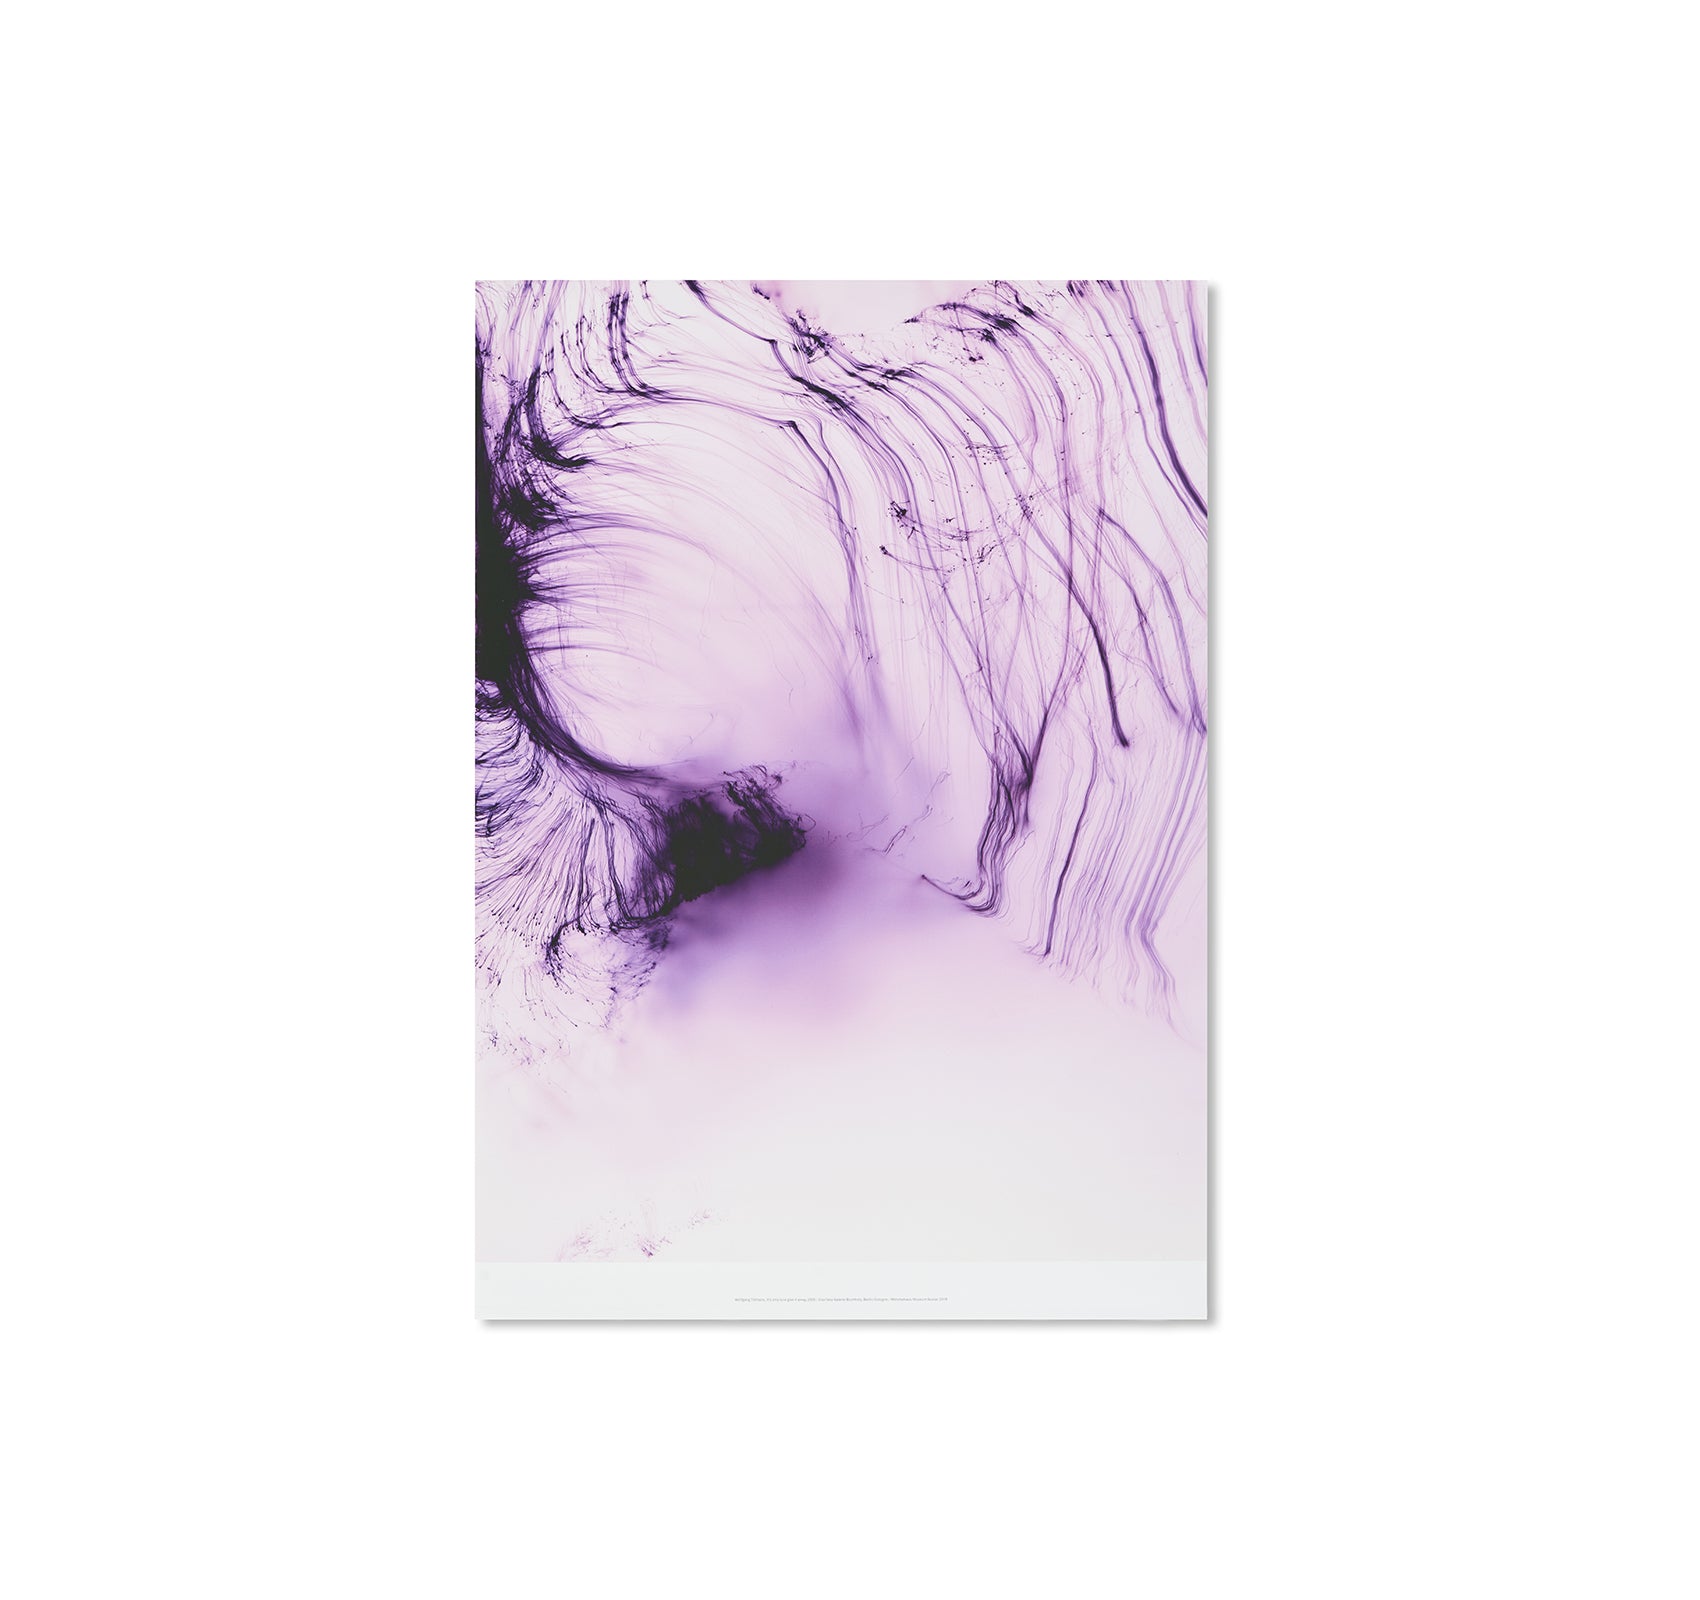 IT’S ONLY LOVE GIVE IT AWAY, 2005 by Wolfgang Tillmans [SALE]